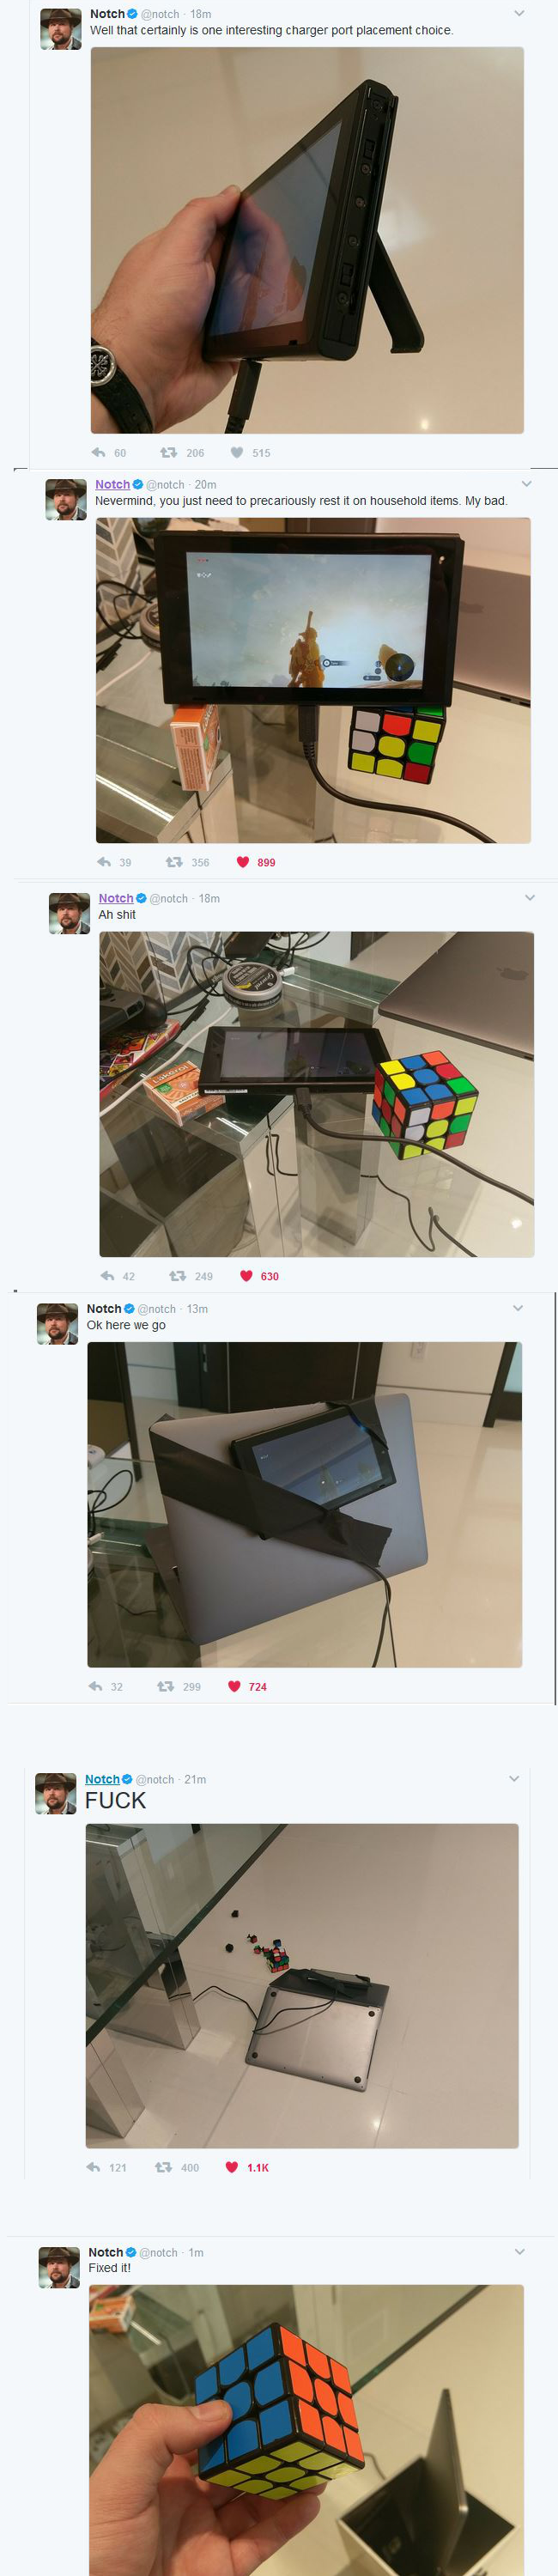 Notch with his Nintendo Switch